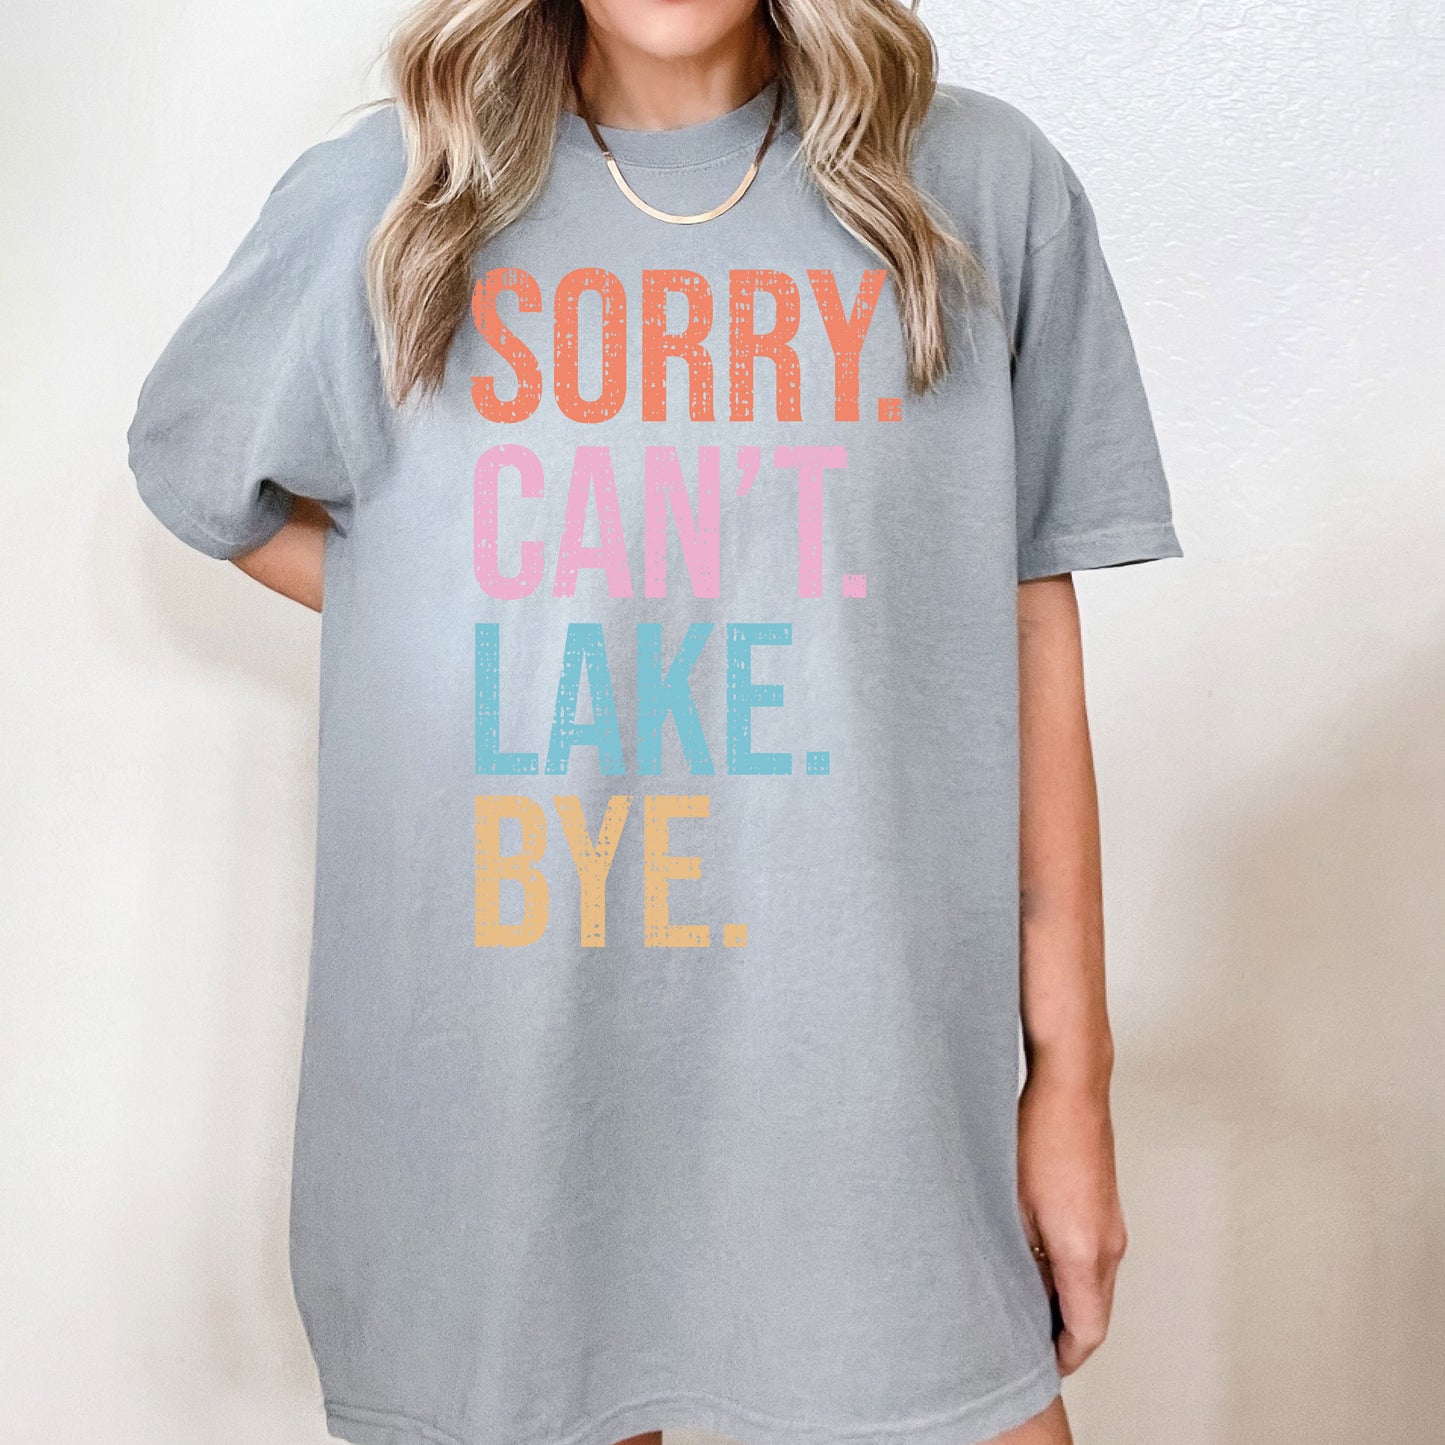 Sorry. Can't. Lake. | Garment Dyed Short Sleeve Tee